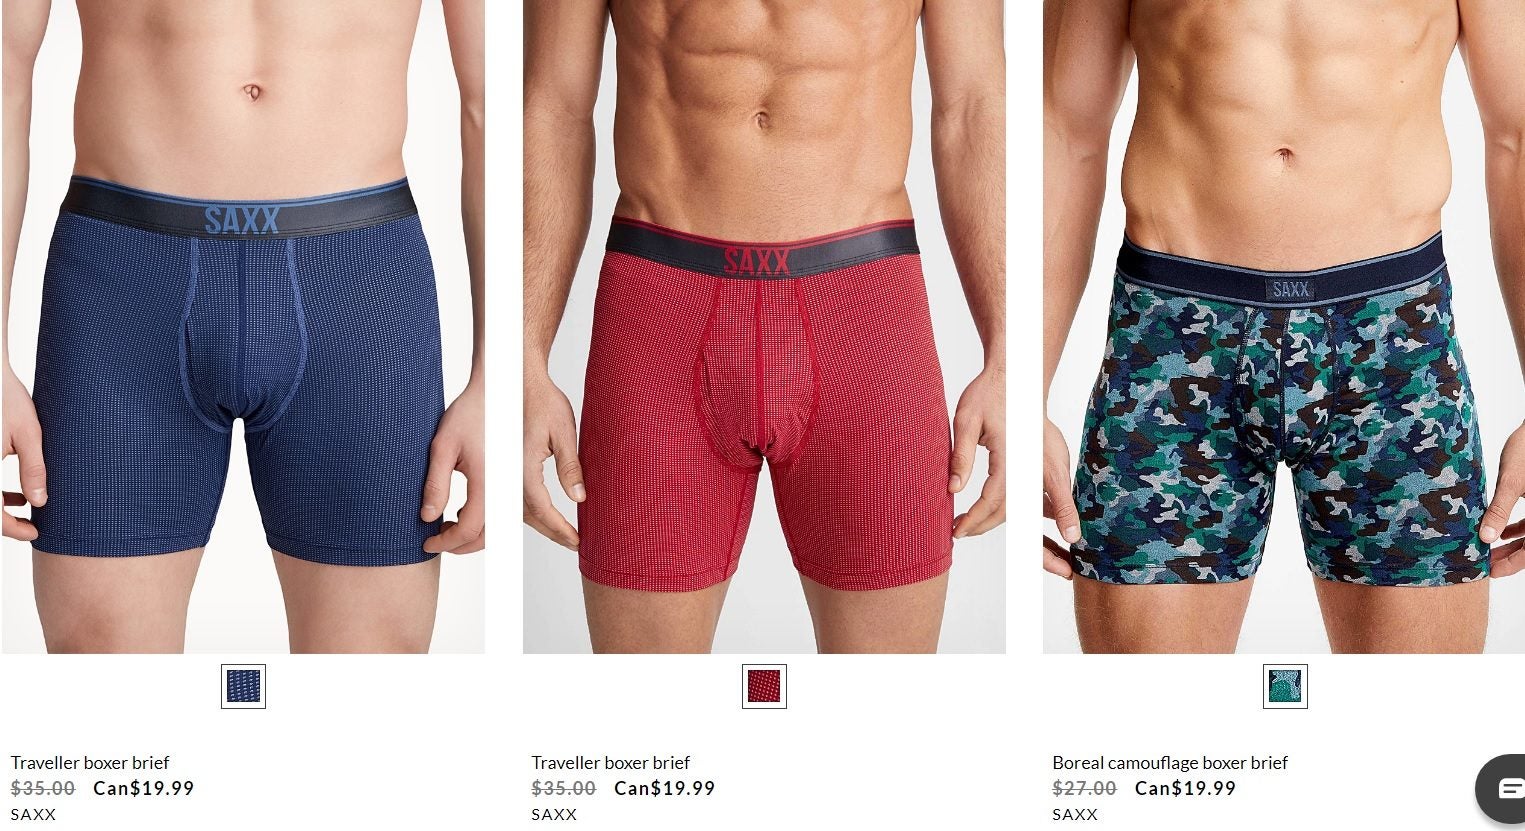 Simons] Selected SAXX underwear on sale from $19.99 - RedFlagDeals